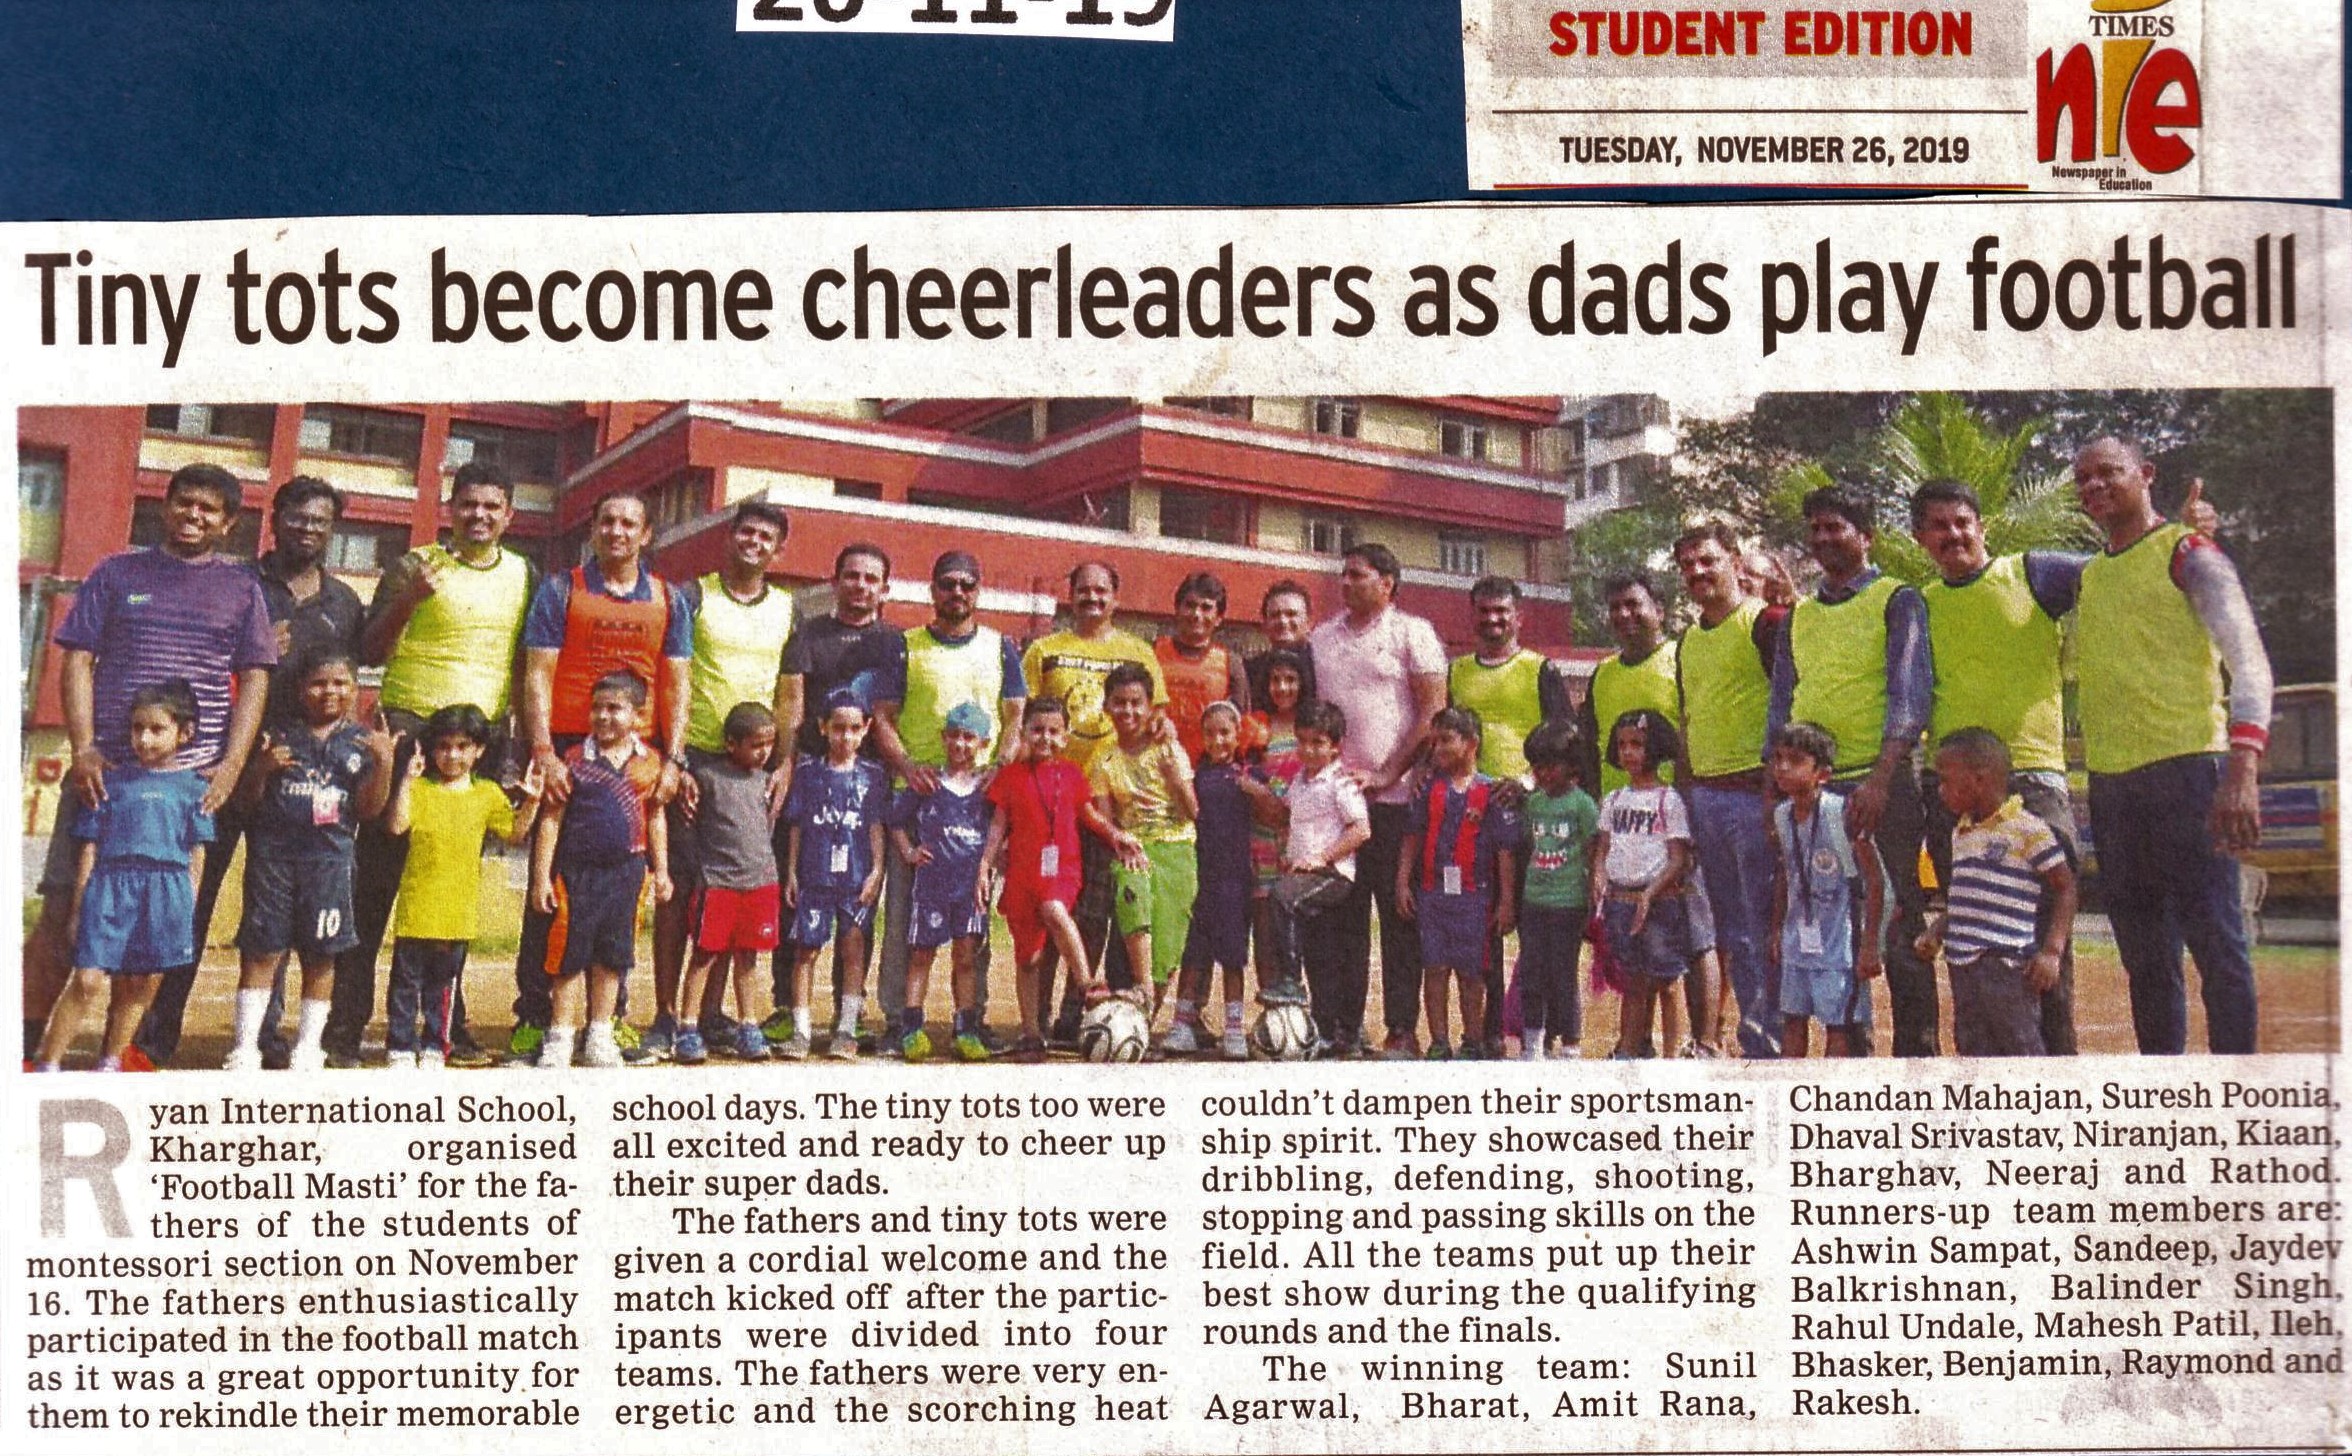 Tiny tots become cheerleaders as dads play football was mentioned in Times NIE - Ryan International School, Kharghar - Ryan Group